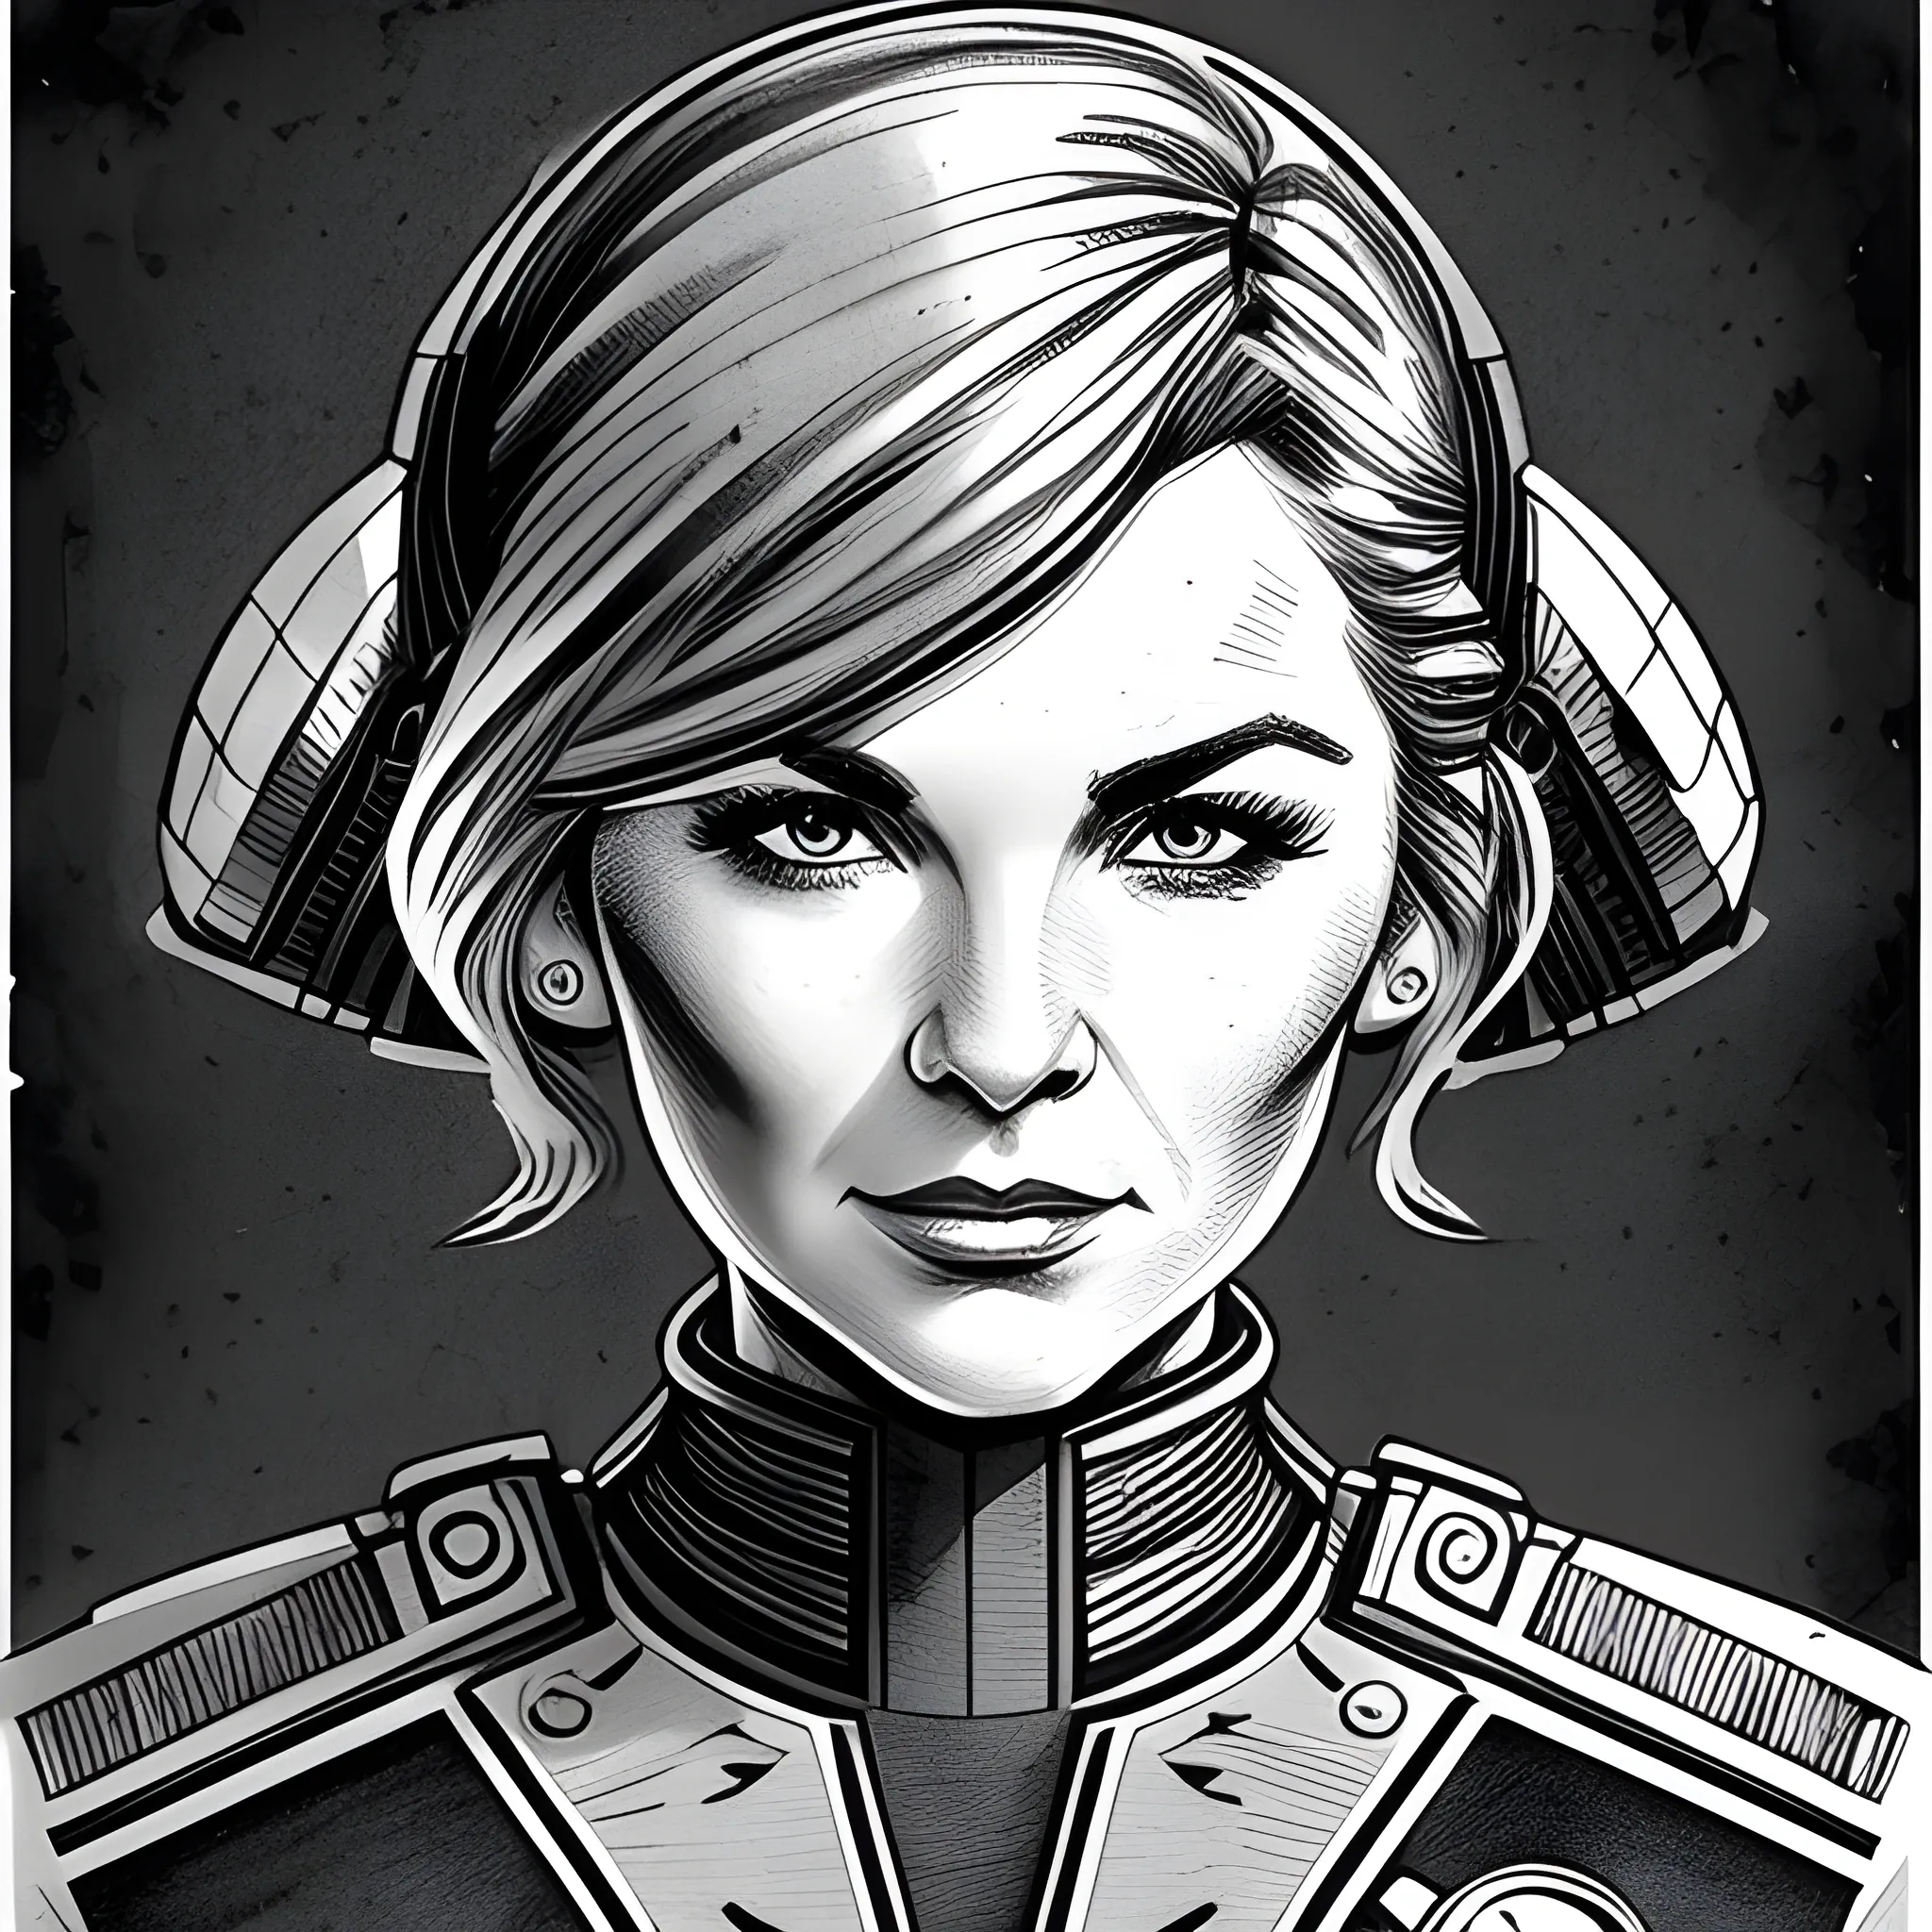 ink sketch with ink wash: Headshot portrait of a gorgeous starship doctor, sci-fi uniform = intricate details, classic graphic novel style, impressionistic illustration, 6x9 format, UHD, 4k, Pencil Sketch